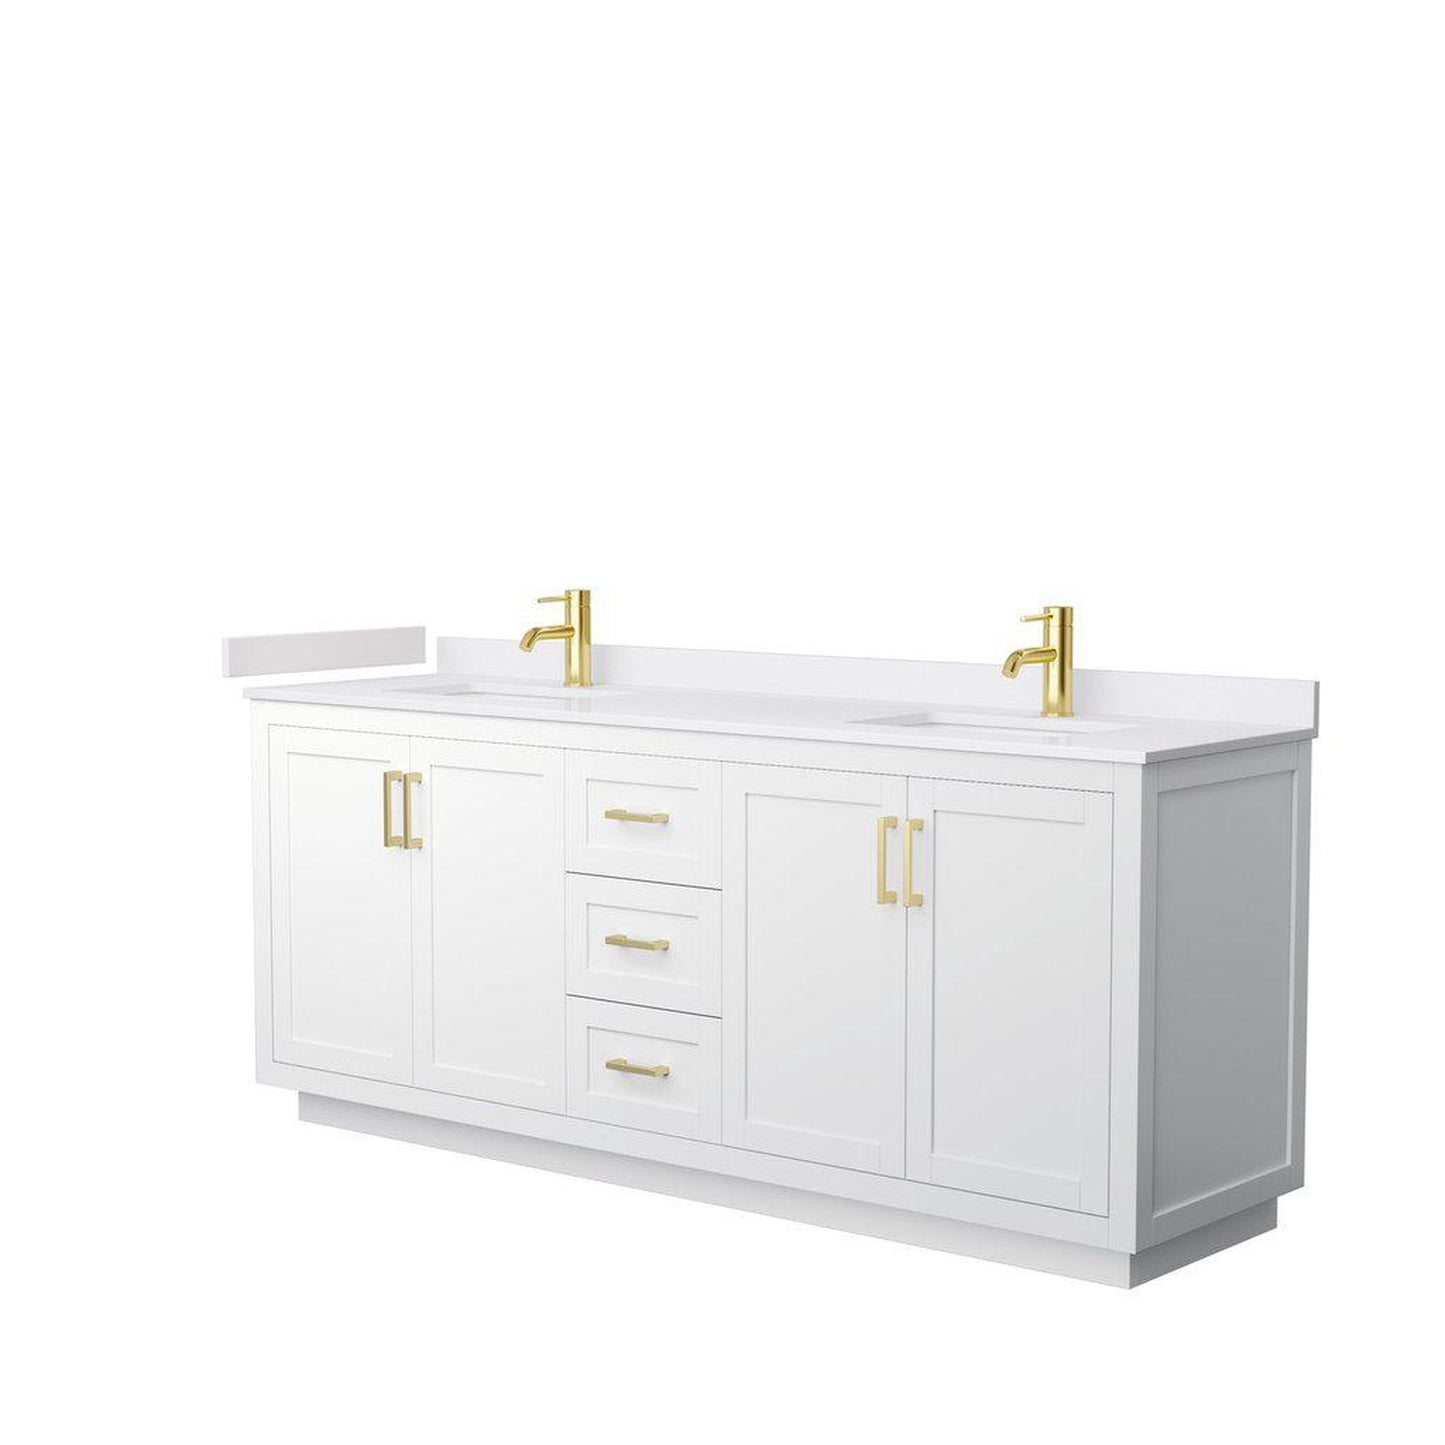 Wyndham Collection Miranda 80" Double Bathroom White Vanity Set With White Cultured Marble Countertop, Undermount Square Sink, And Brushed Gold Trim